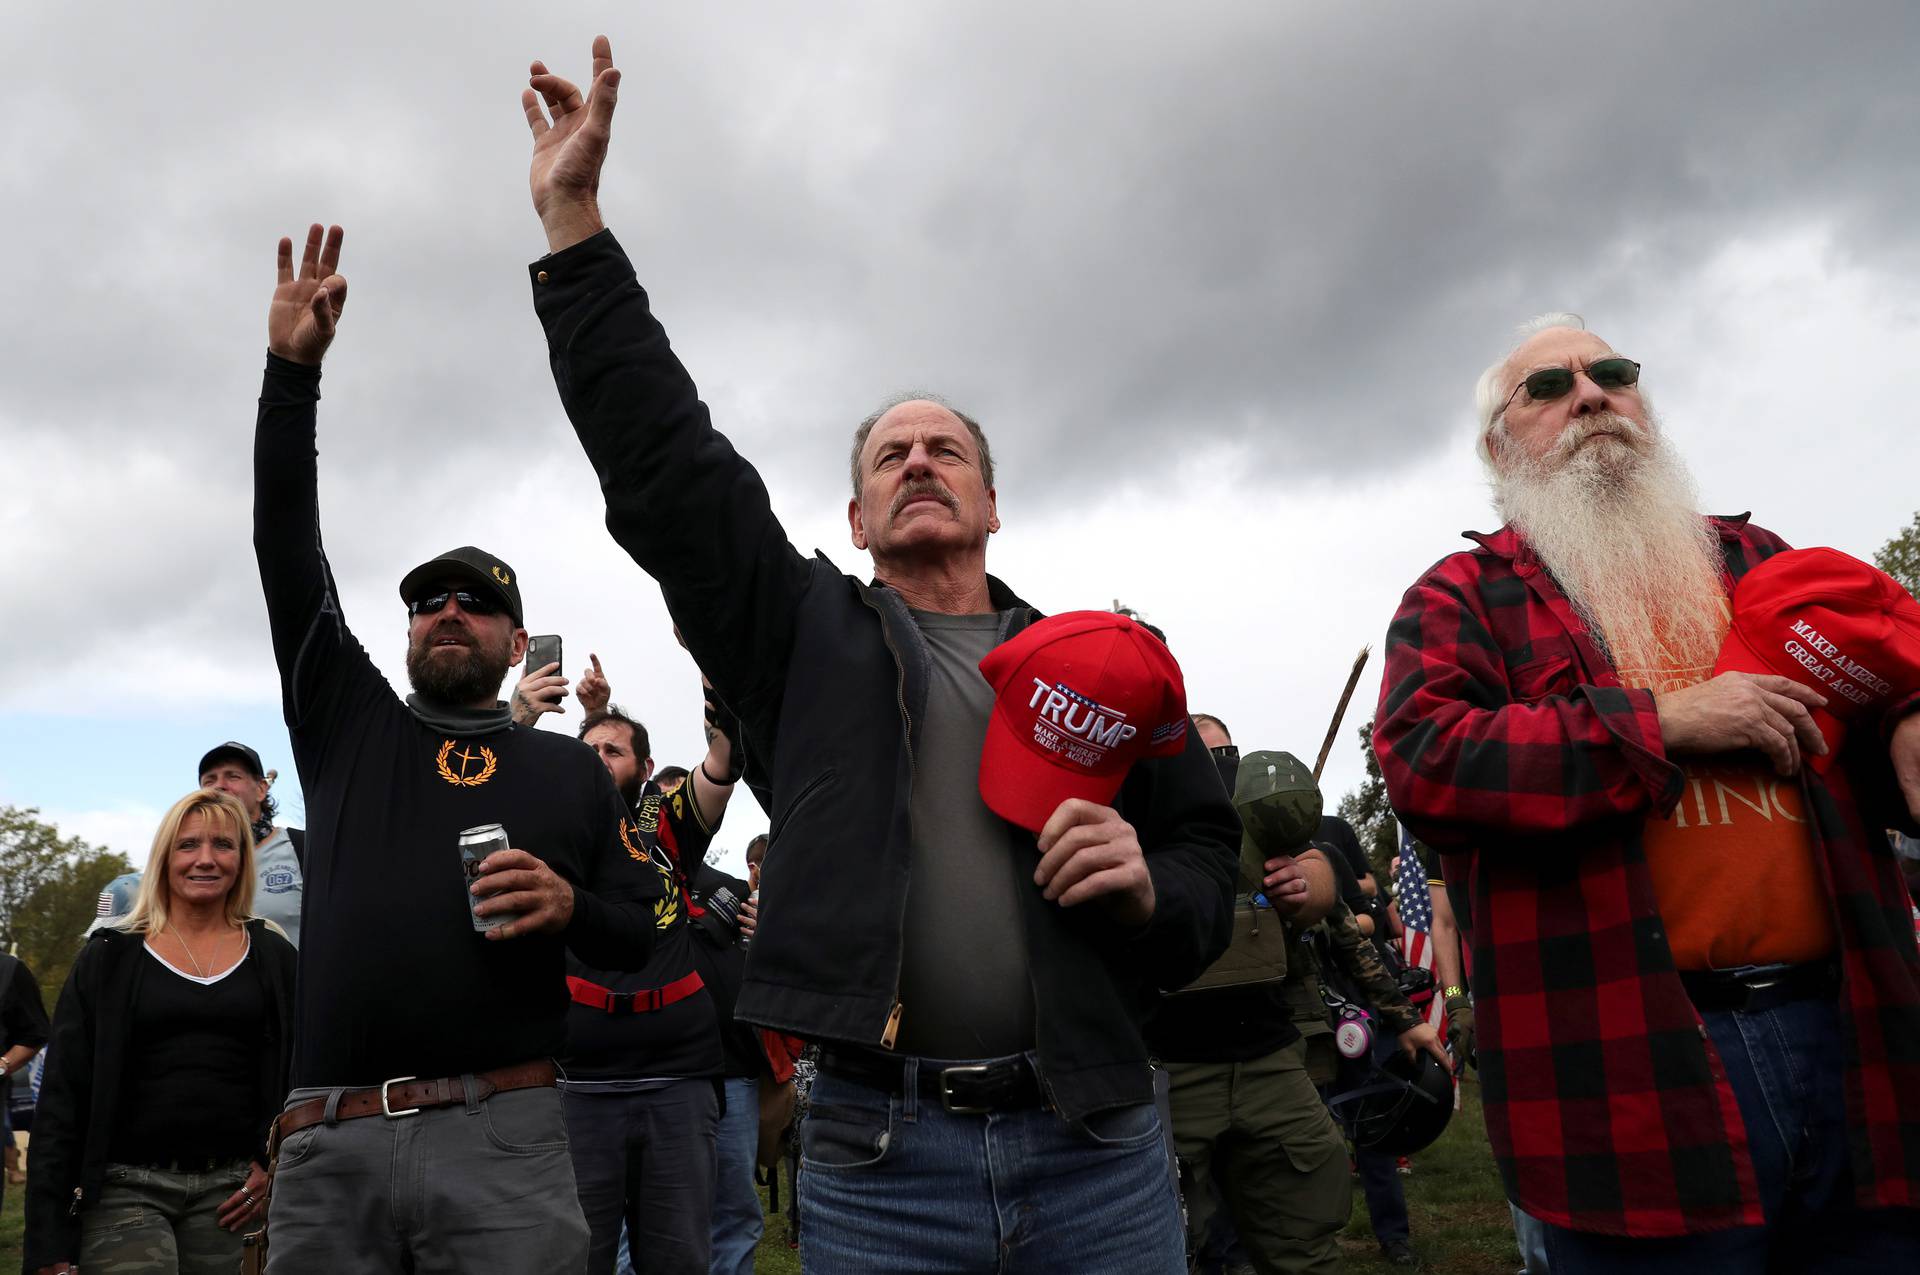 People raise their hands during a rally of the far right group Proud Boys, in Portland